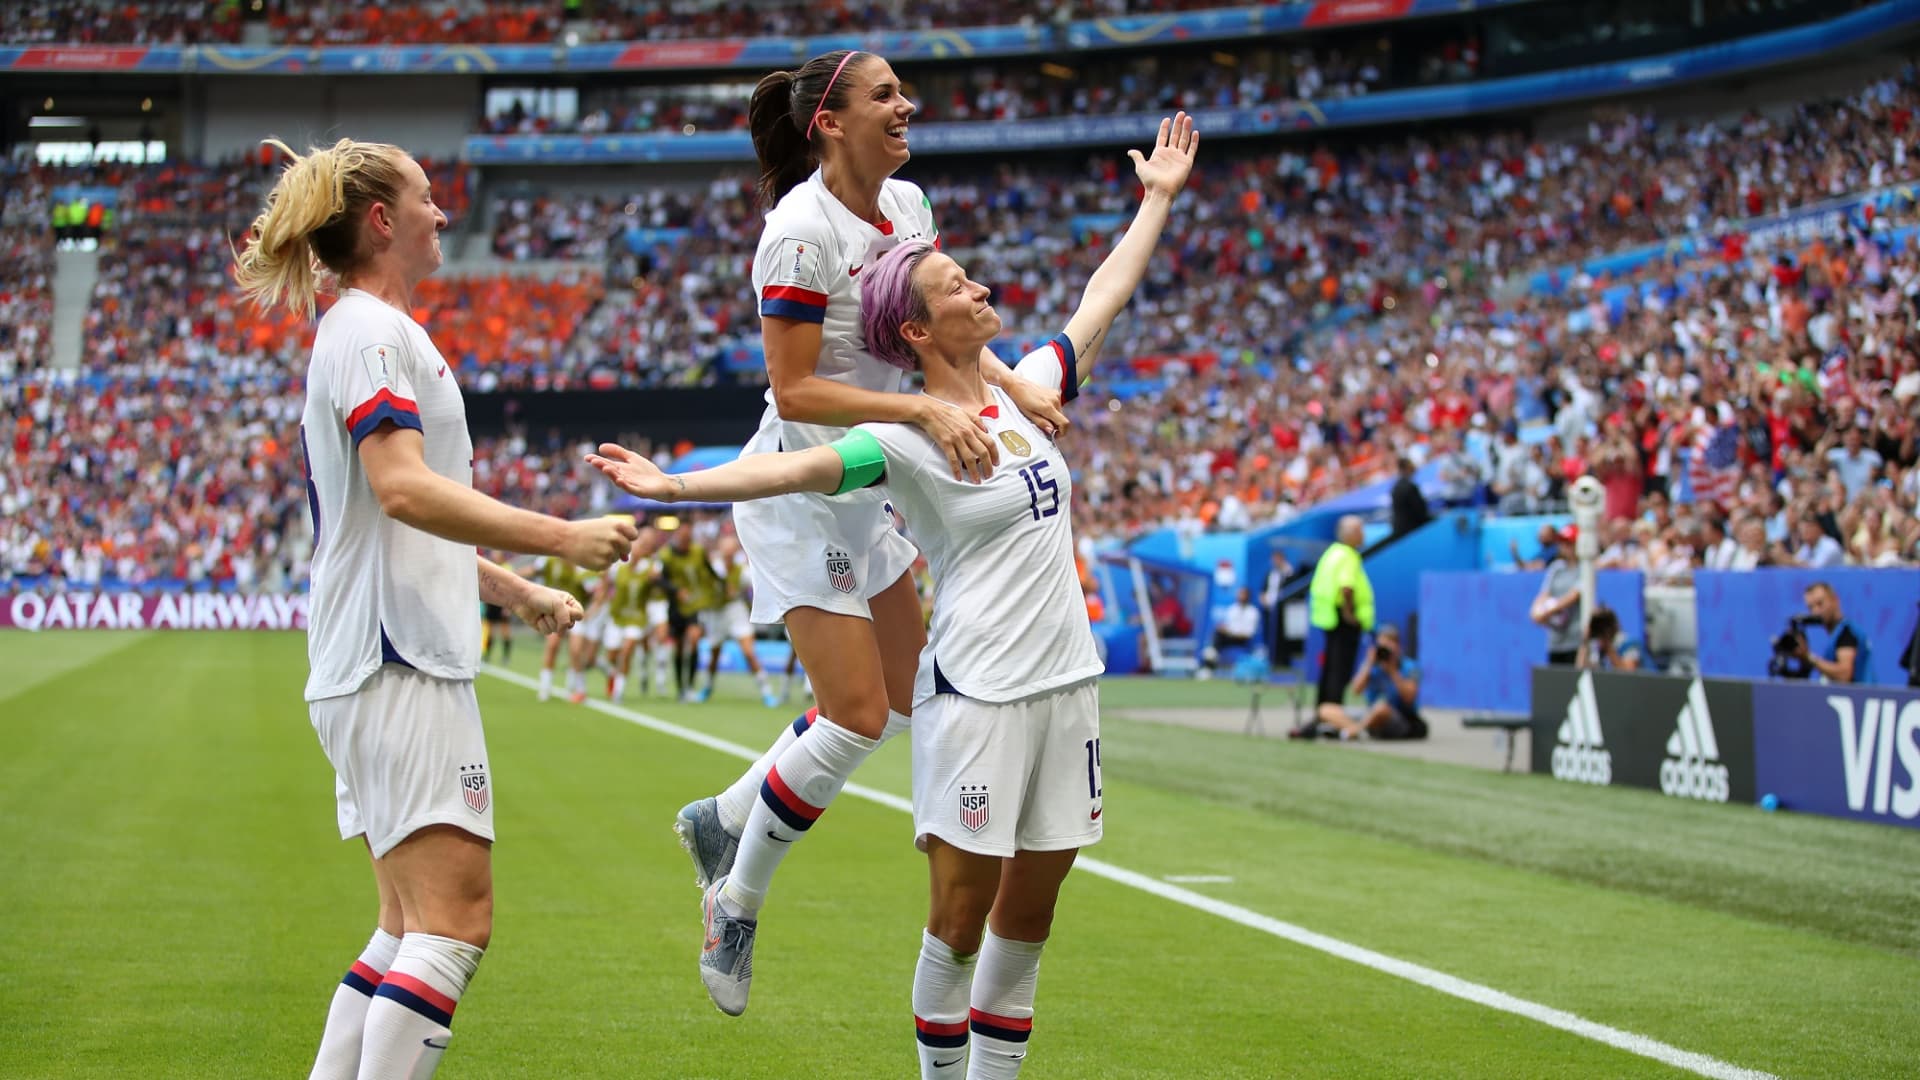 How To Watch Women’s World Cup Final